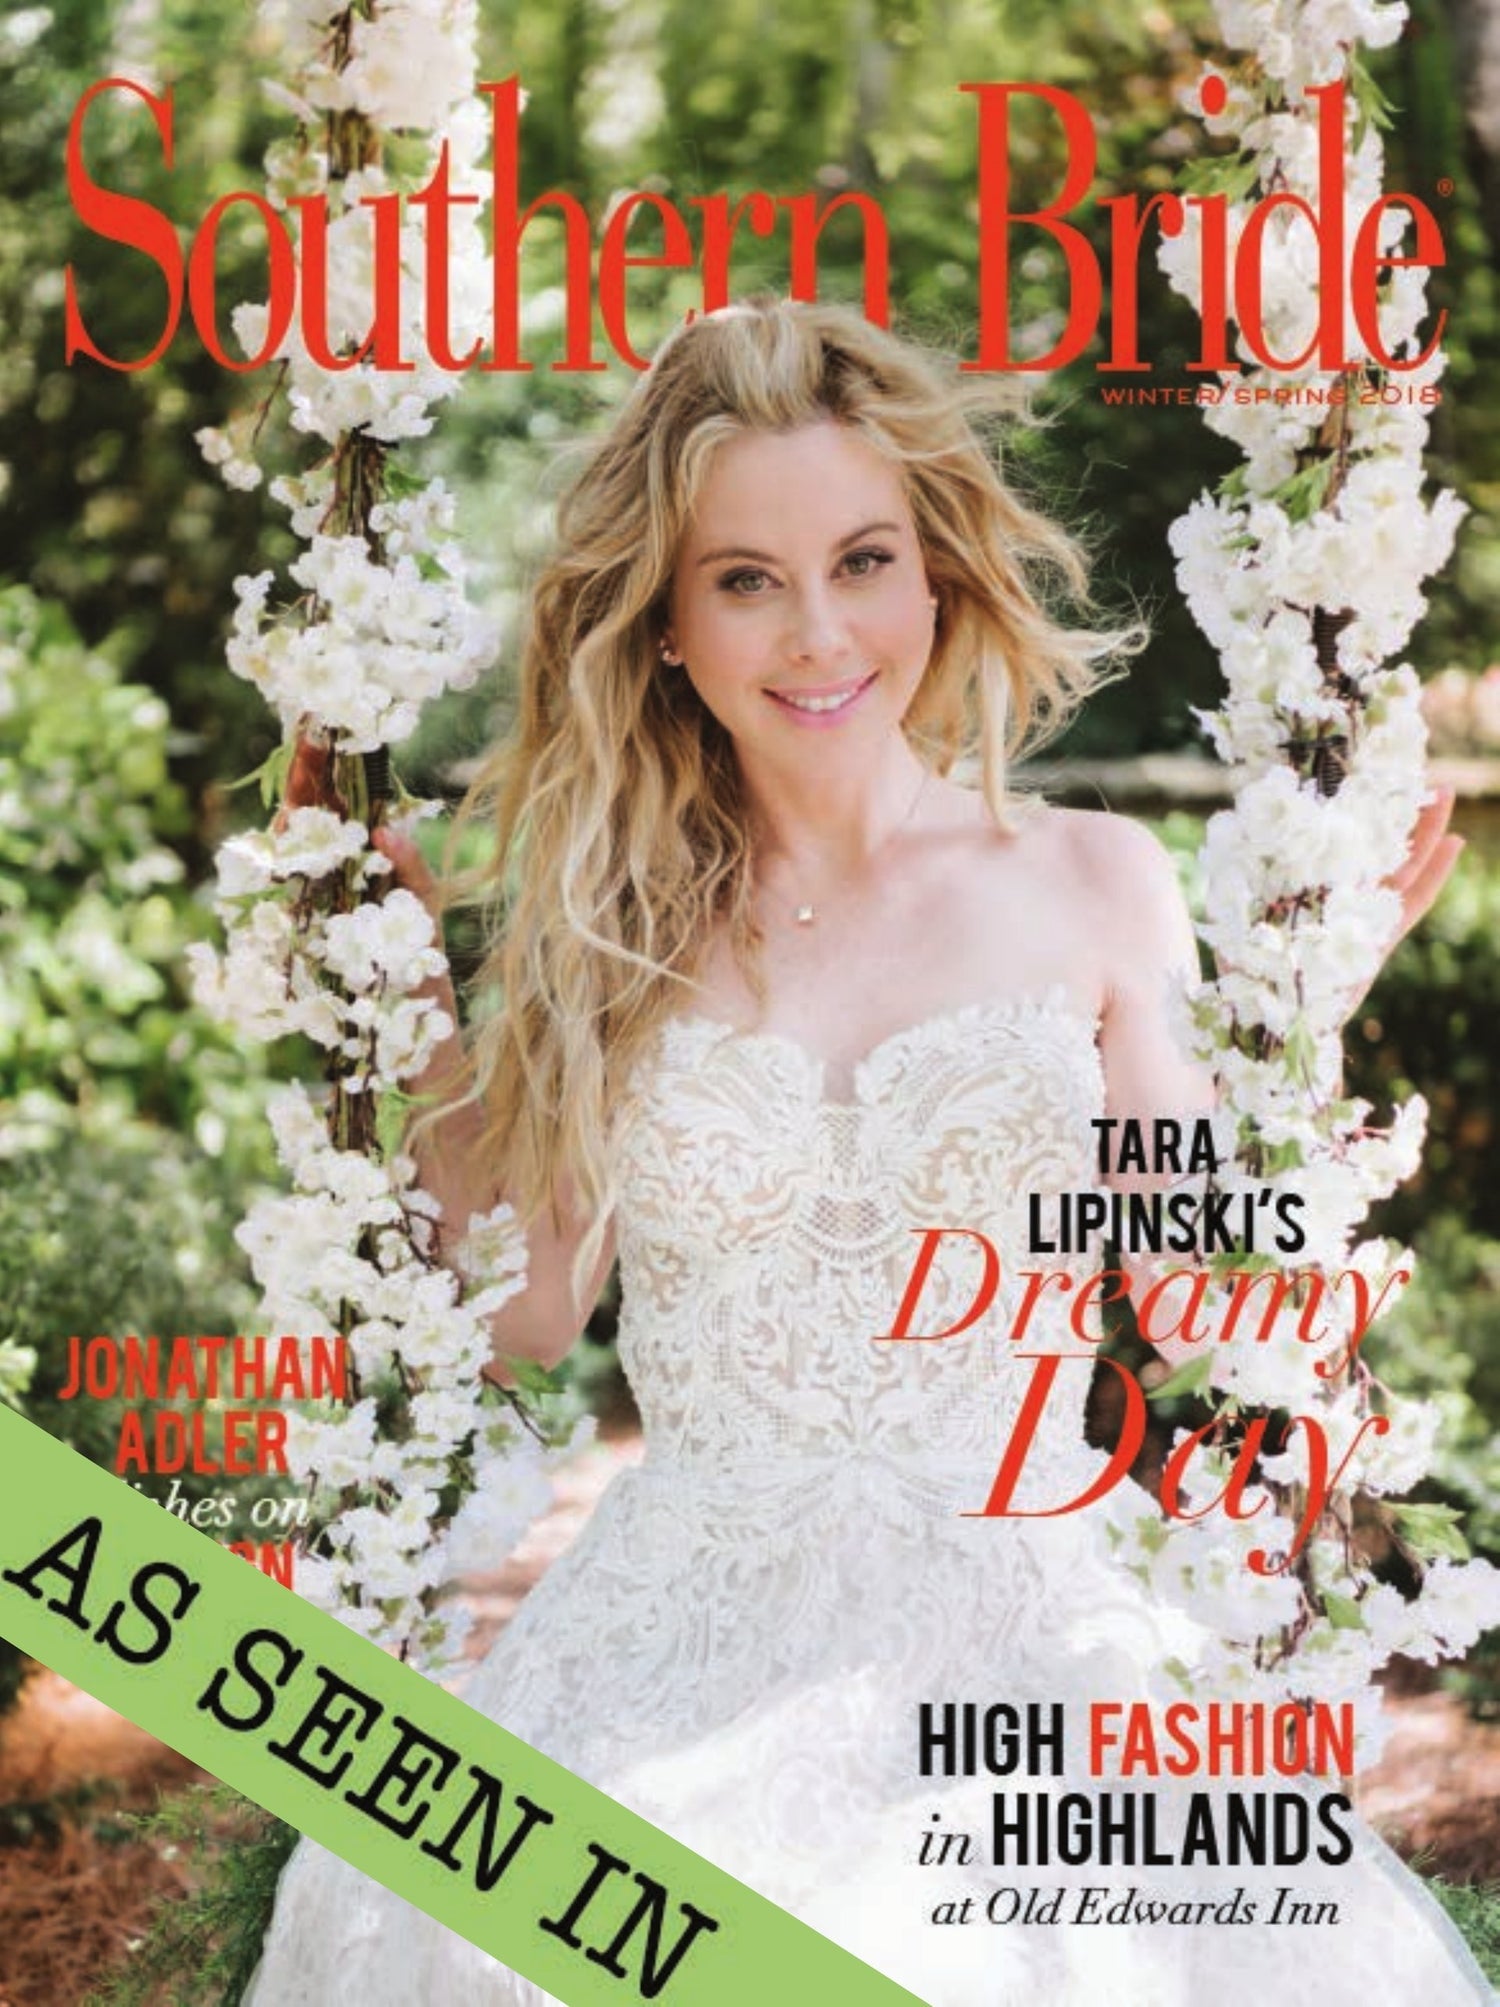 Reception Flip Flop's Feature in Southern Bride Magazine